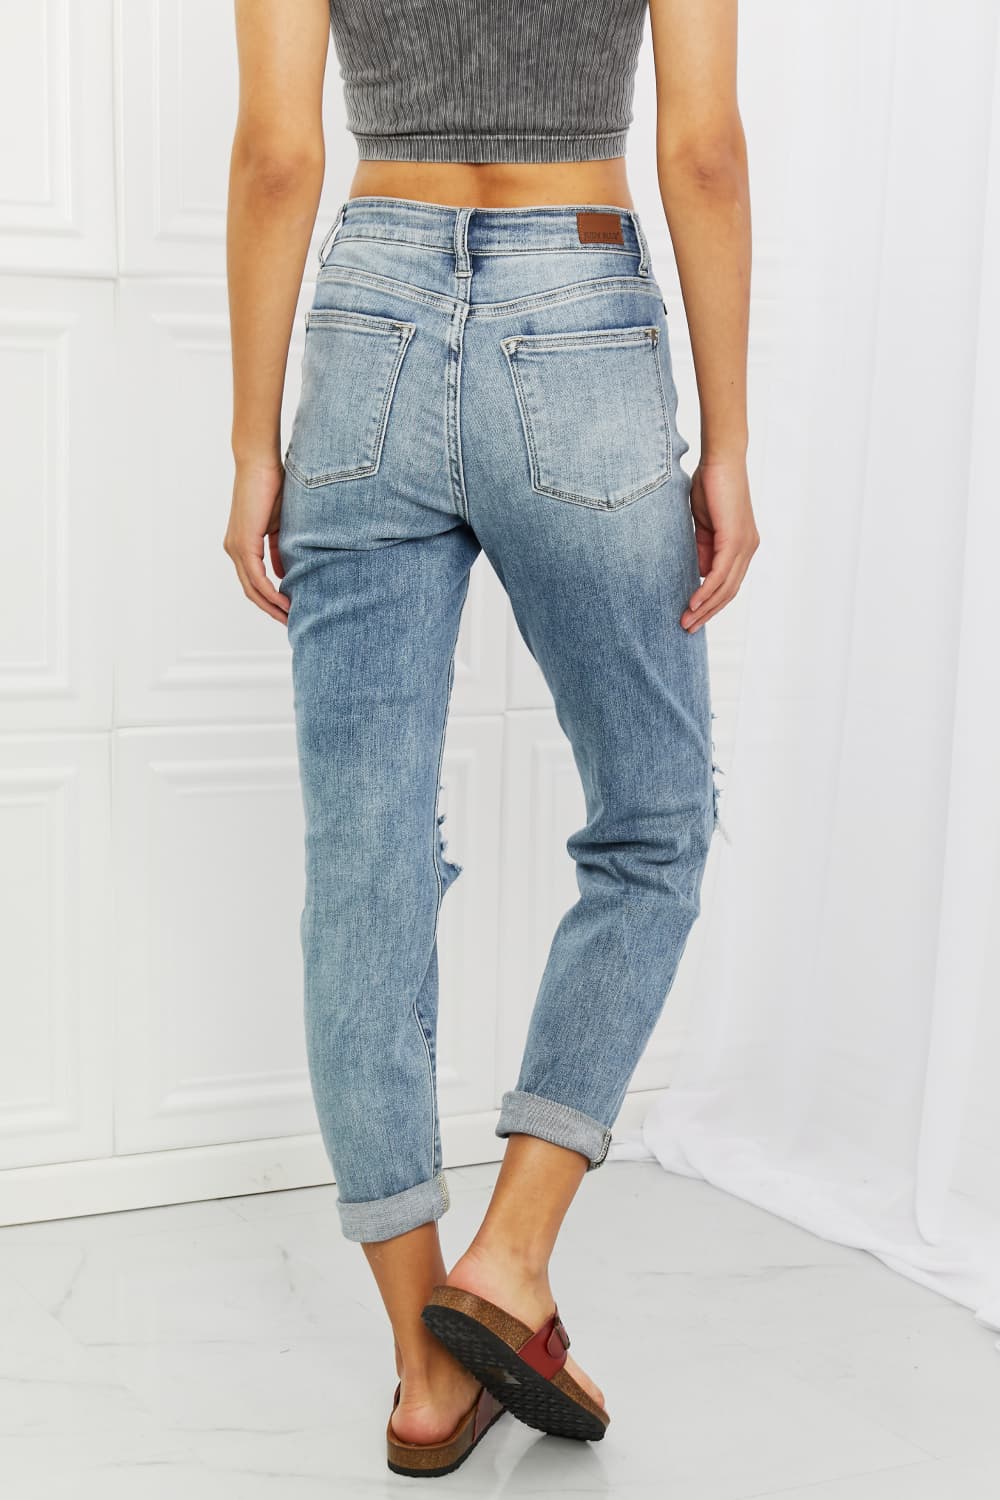 Back View, Judy Blue, Mid-Rise Ripped Double Cuff Boyfriend Jeans, 82458